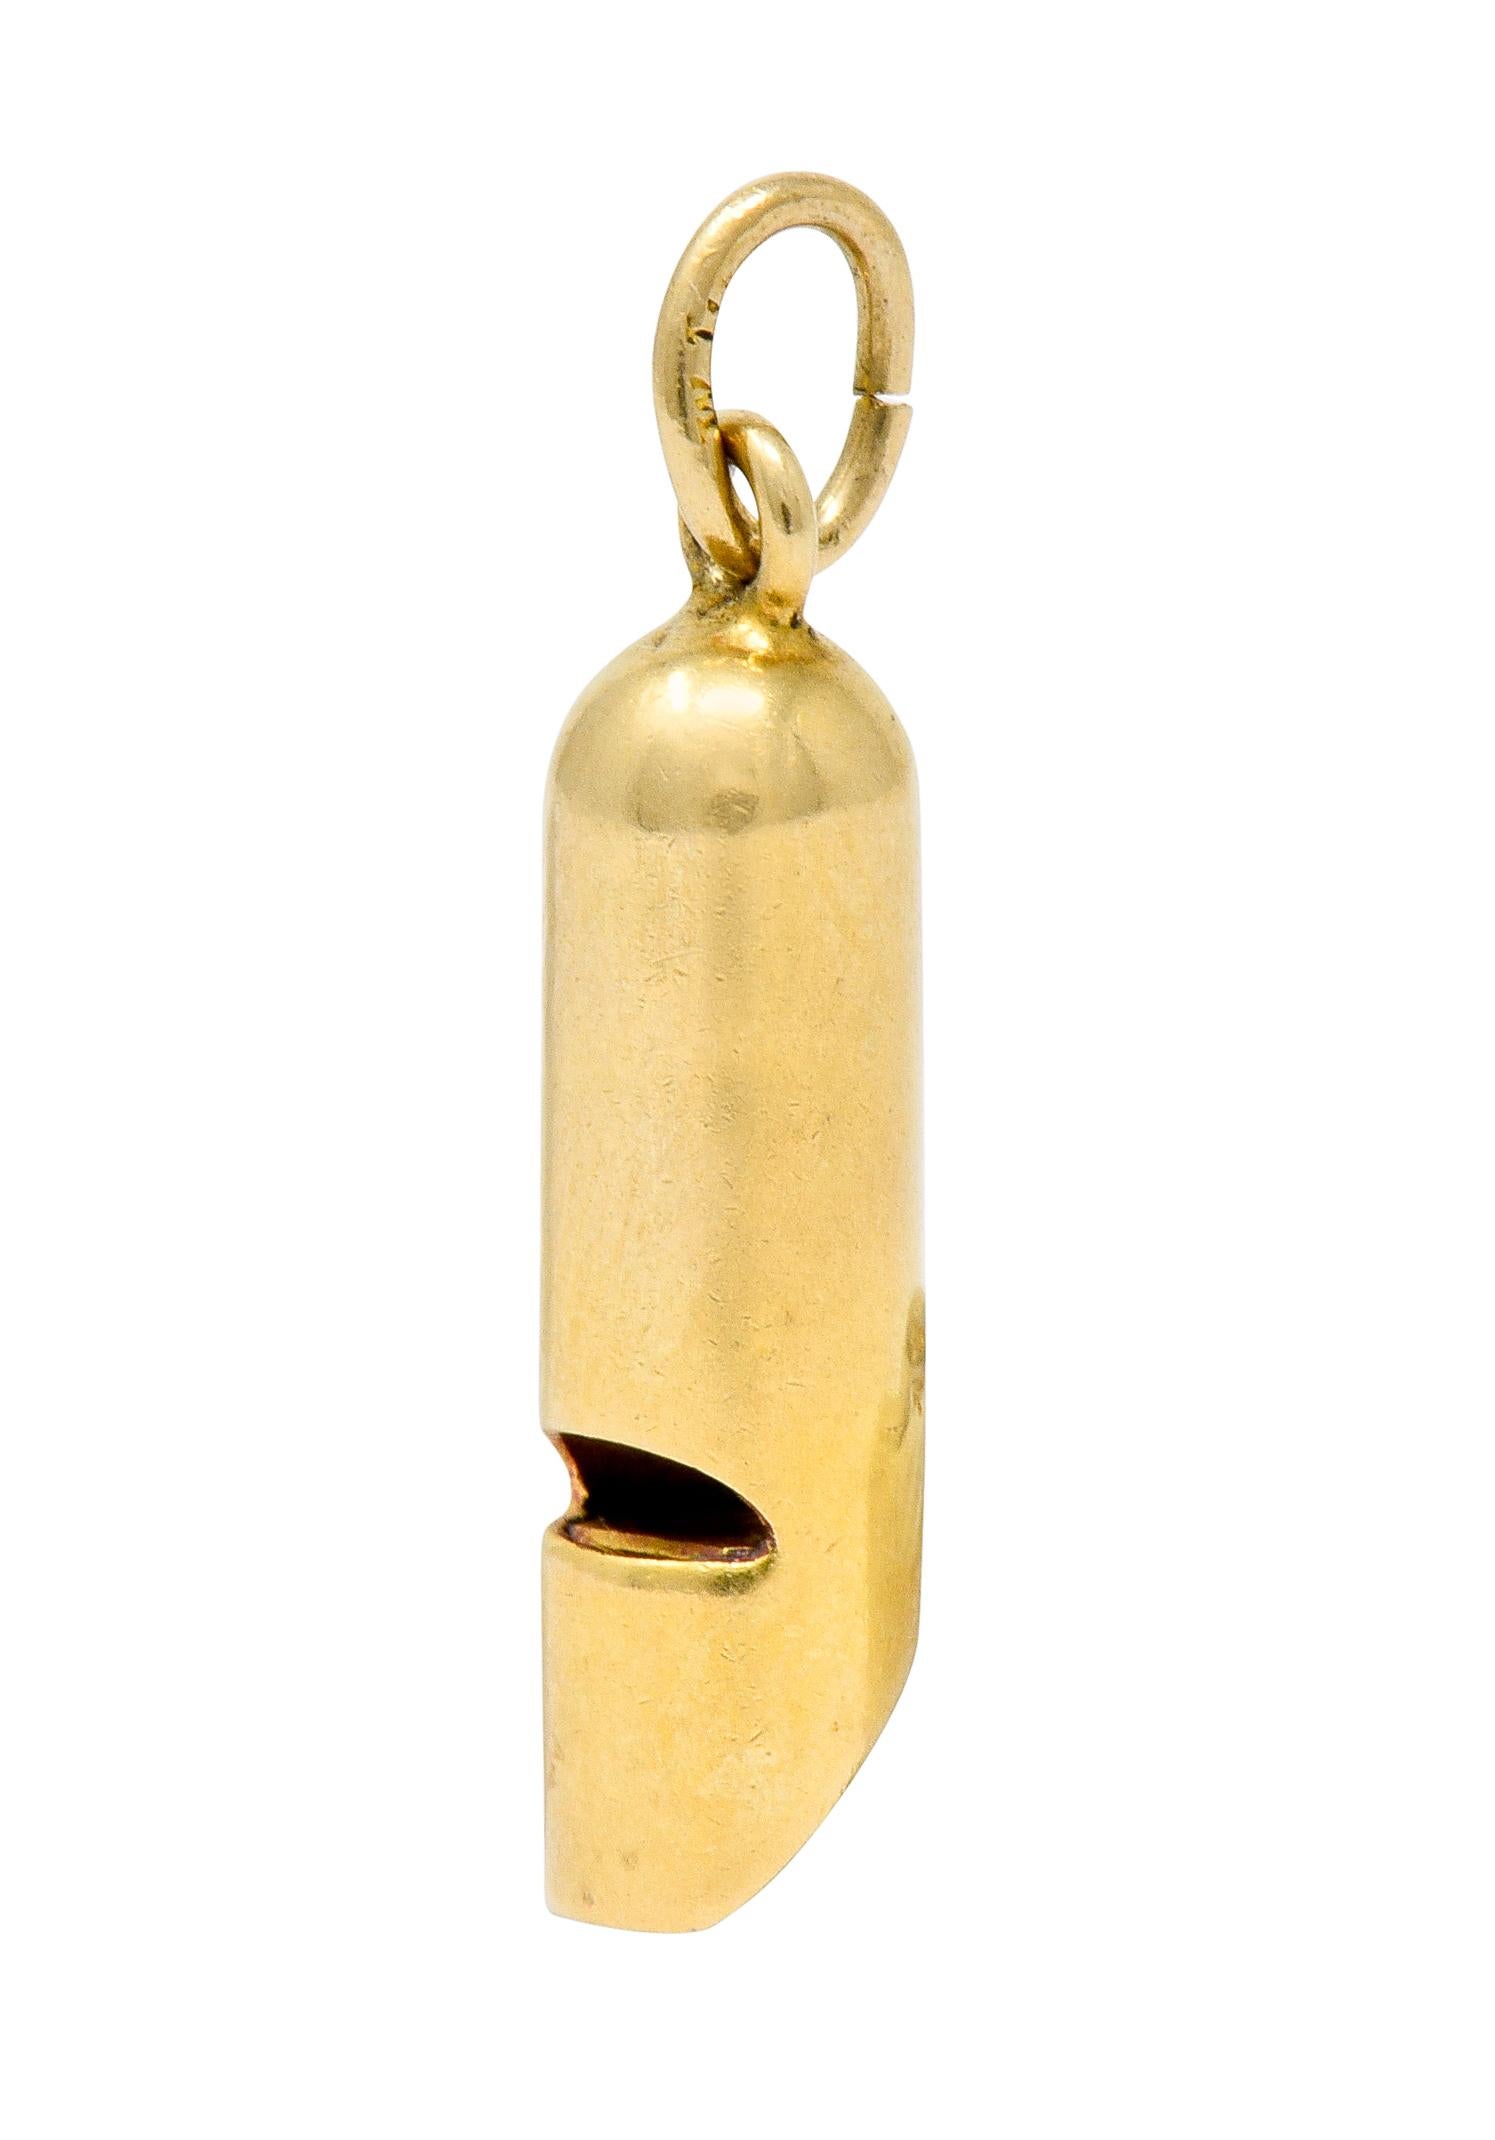 Designed as an elongated and streamlined whistle with a bright polish

Tapered at end as a mouthpiece and with pierced air escape

Functional with a modest high pitched whistle

Stamped 14K for 14 karat gold

Circa: 1905

Measures: 1/4 x 7/8 inch